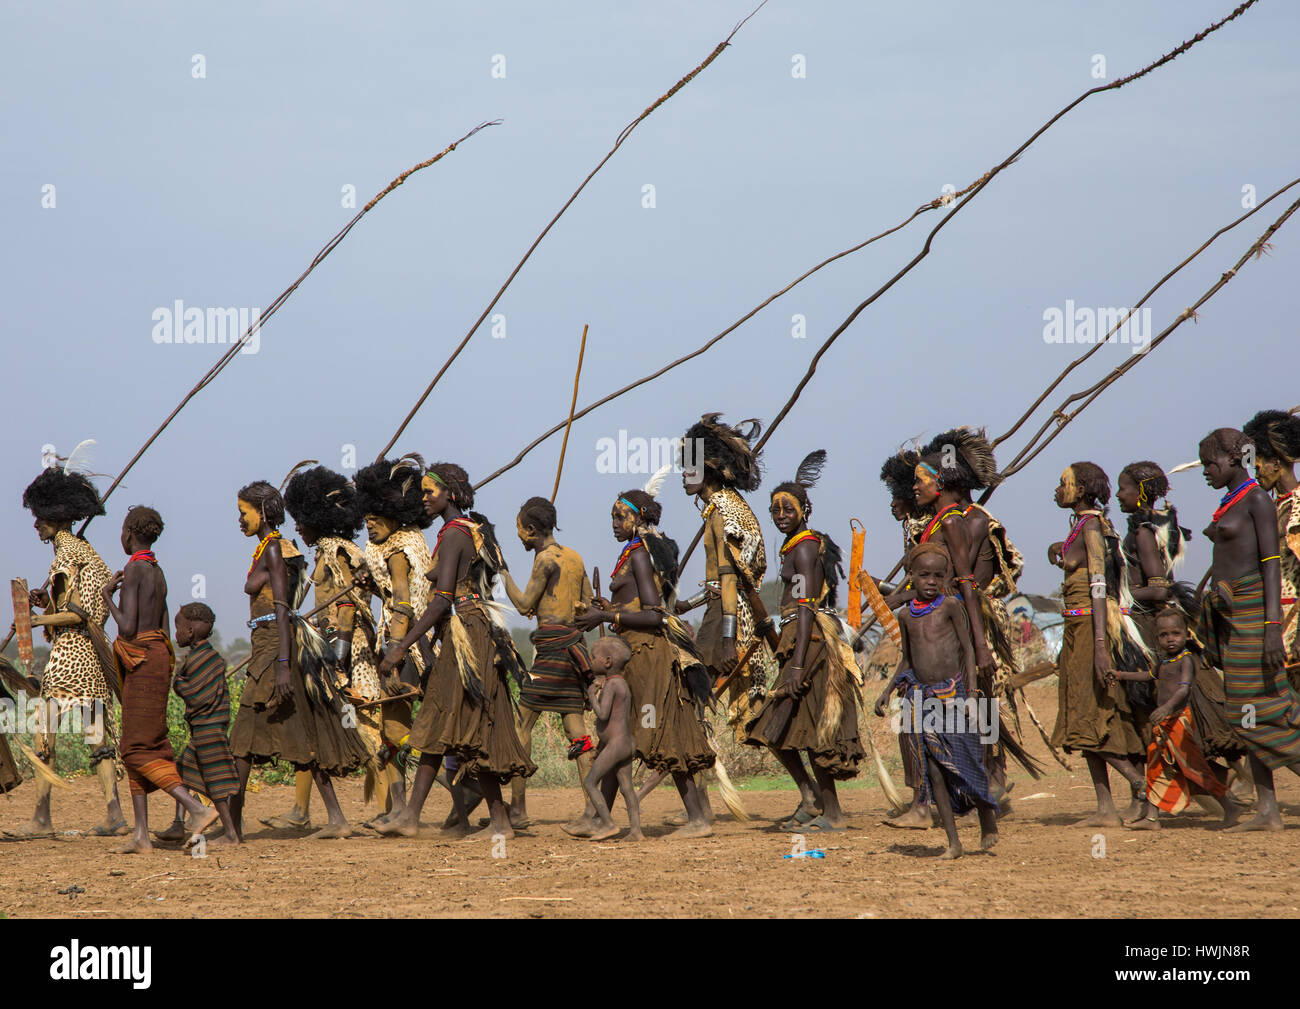 Dimi ceremony in the Dassanech tribe to celebrate circumcision of teenagers, Omo Valley, Omorate, Ethiopia Stock Photo